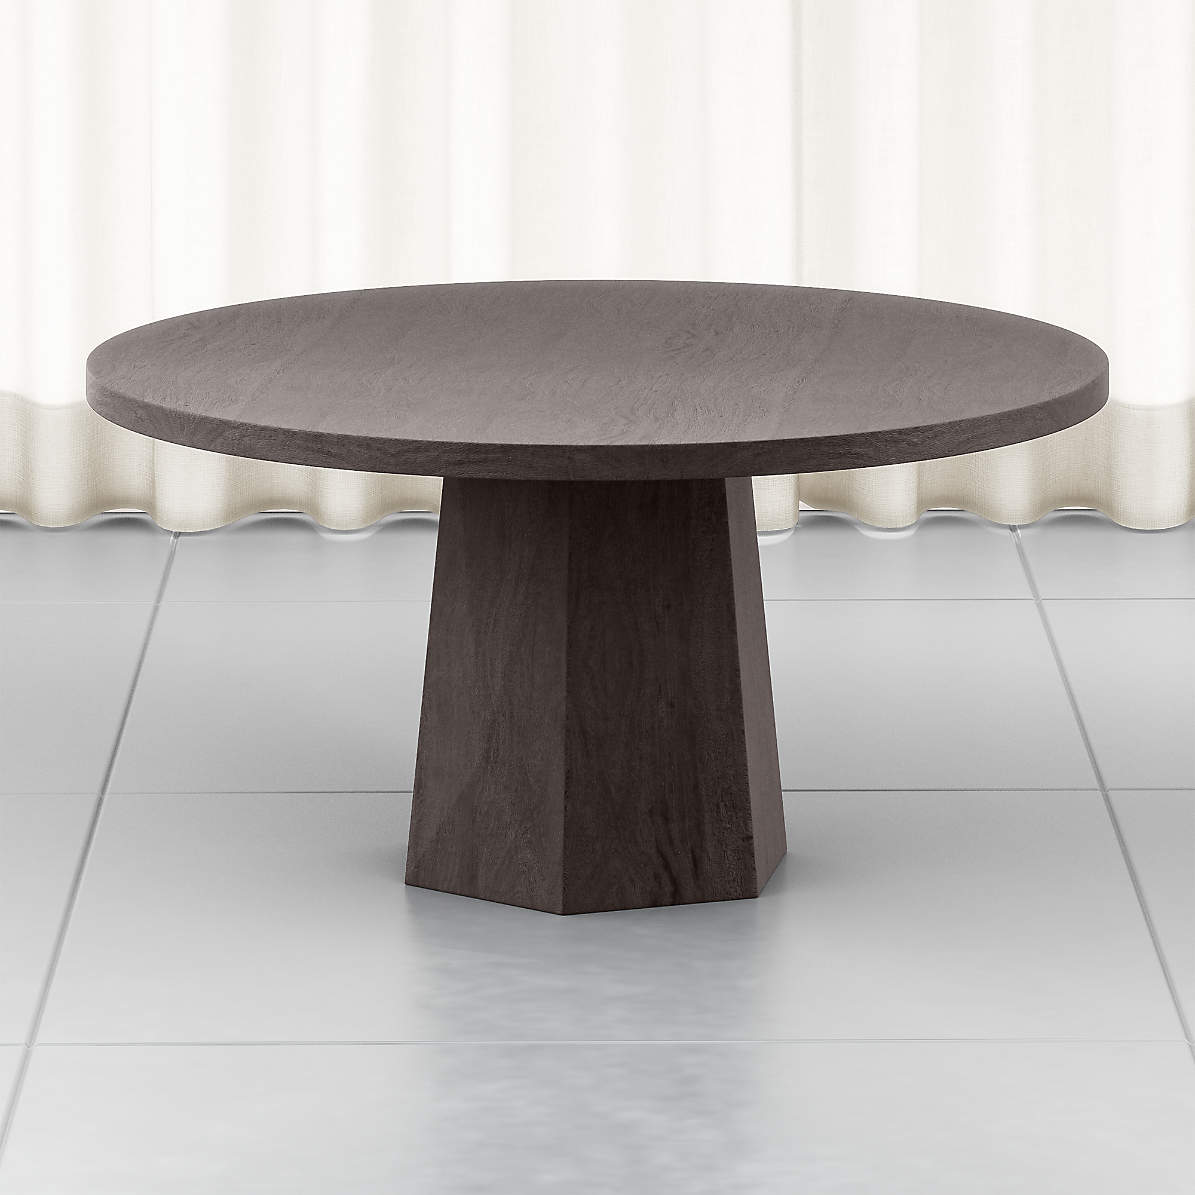 Kesling 60 Round Wood Dining Table Reviews Crate And Barrel